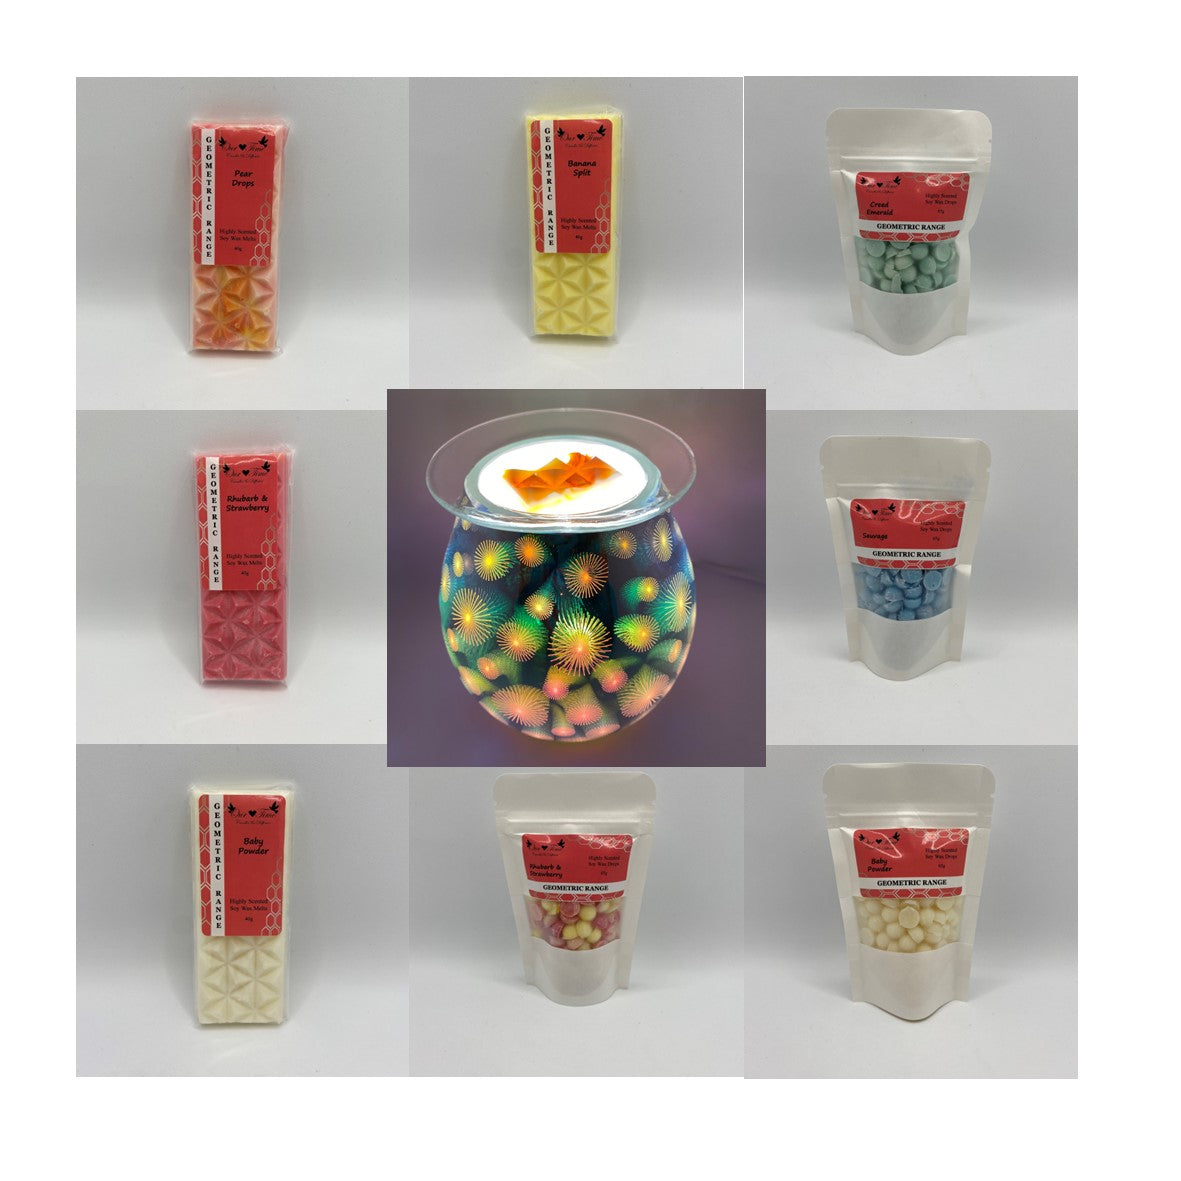 Our Time Geometric range photo showing colourful melts, melt drops and a geometric electric wax melter